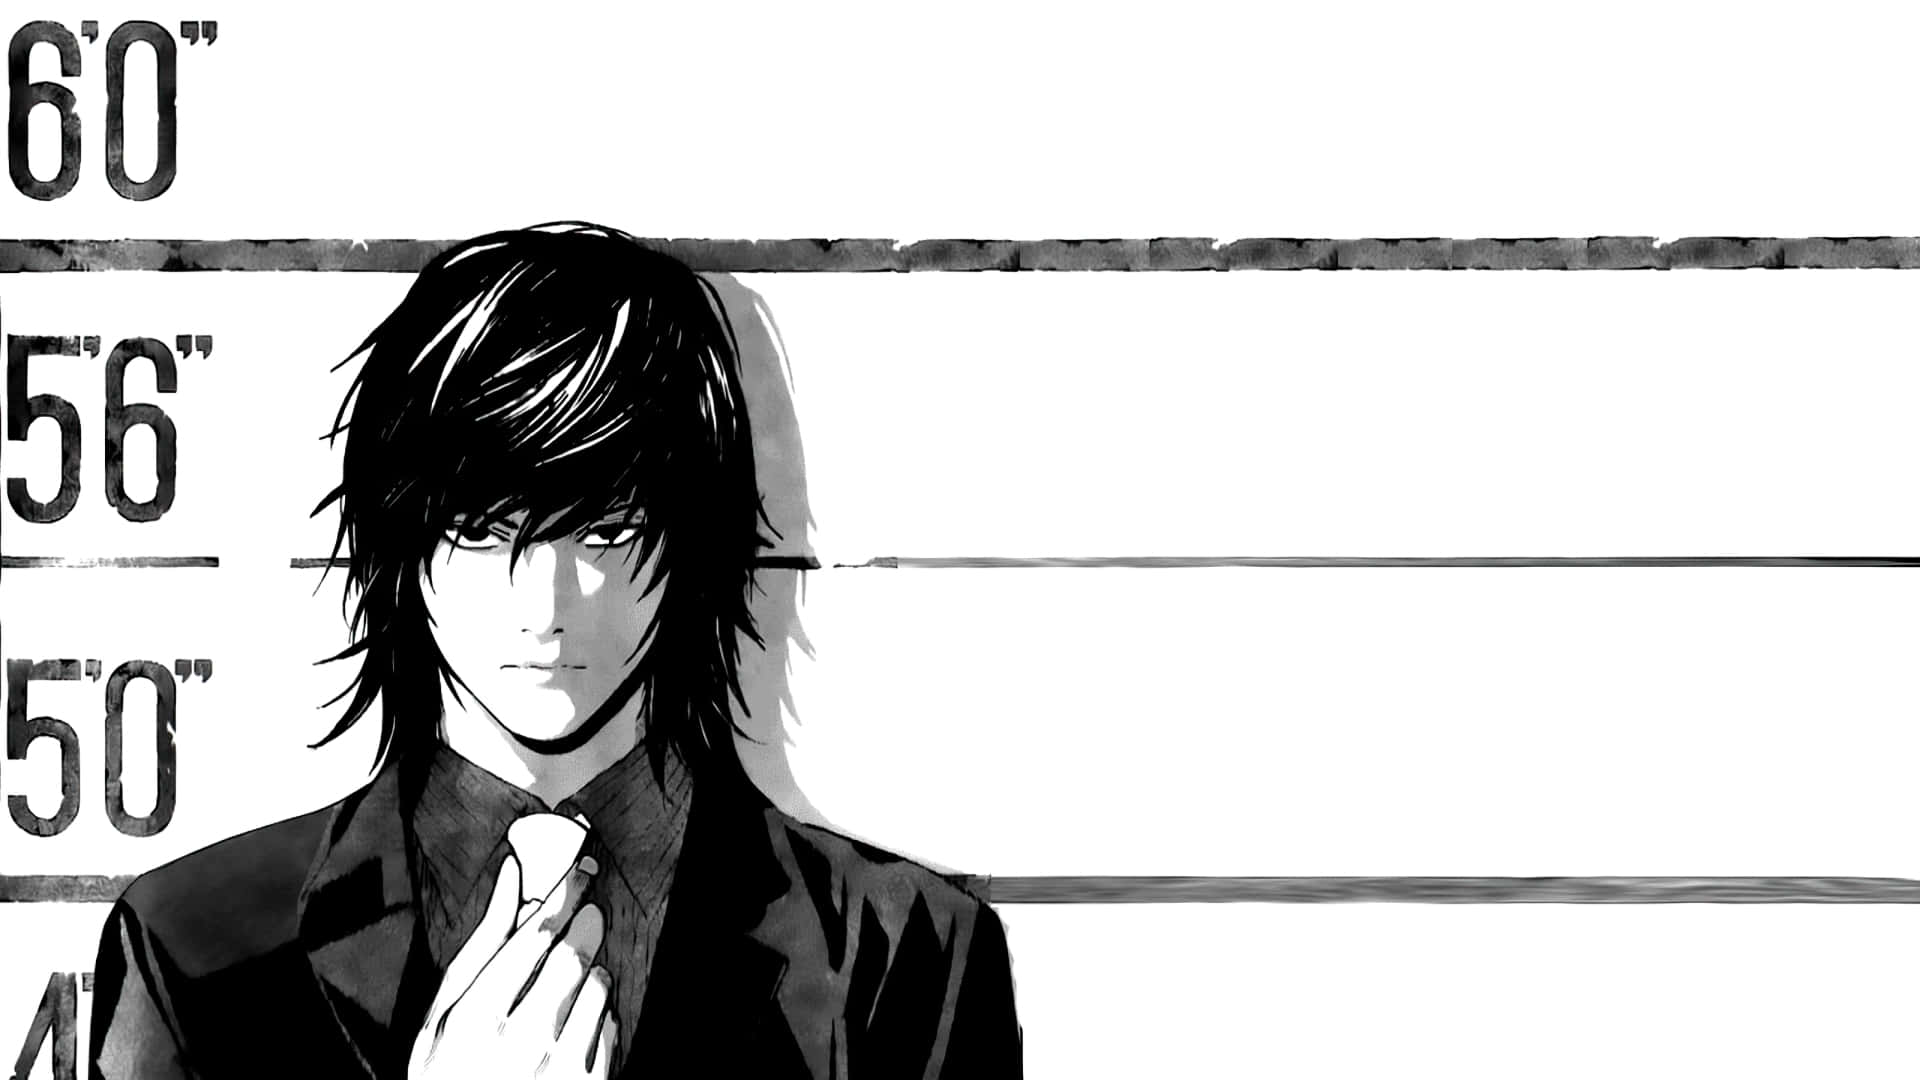 The secretive world of Death Note